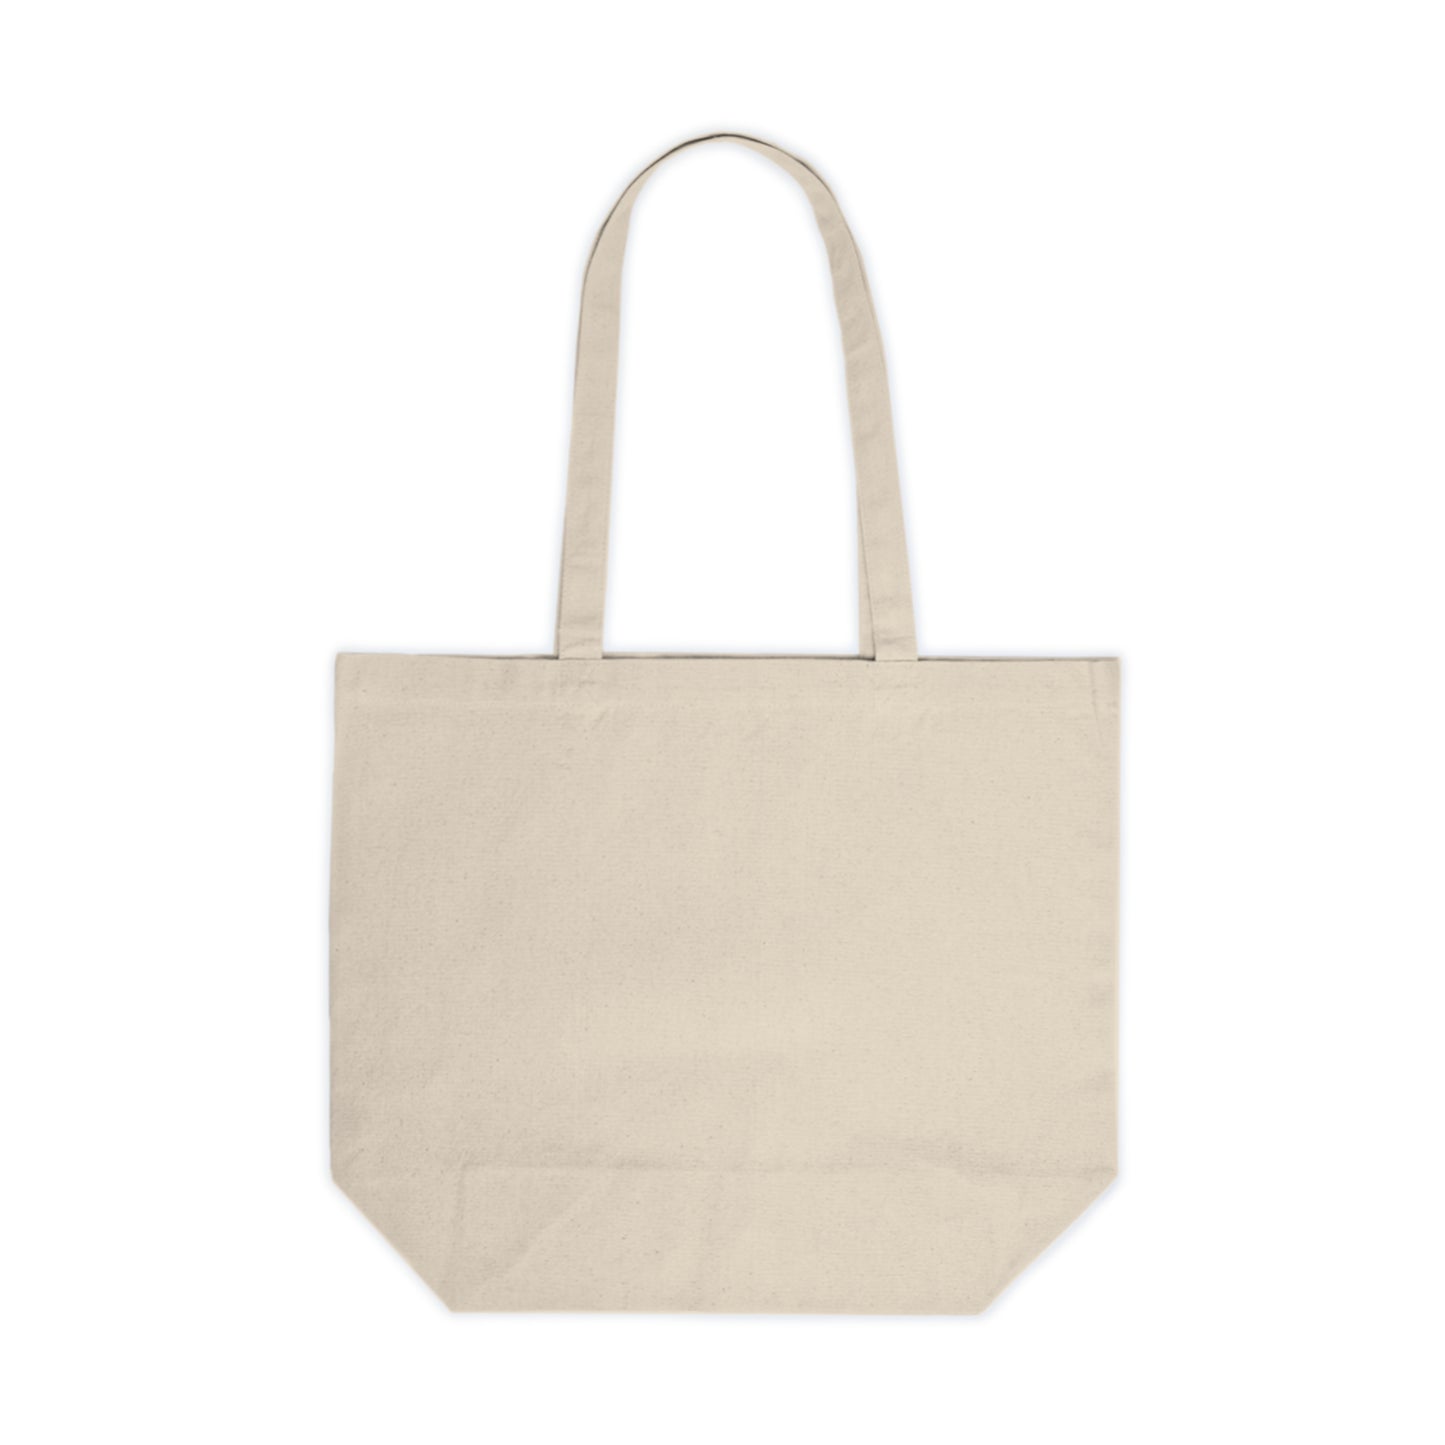 Be a Lighthouse - Canvas Shopping Tote